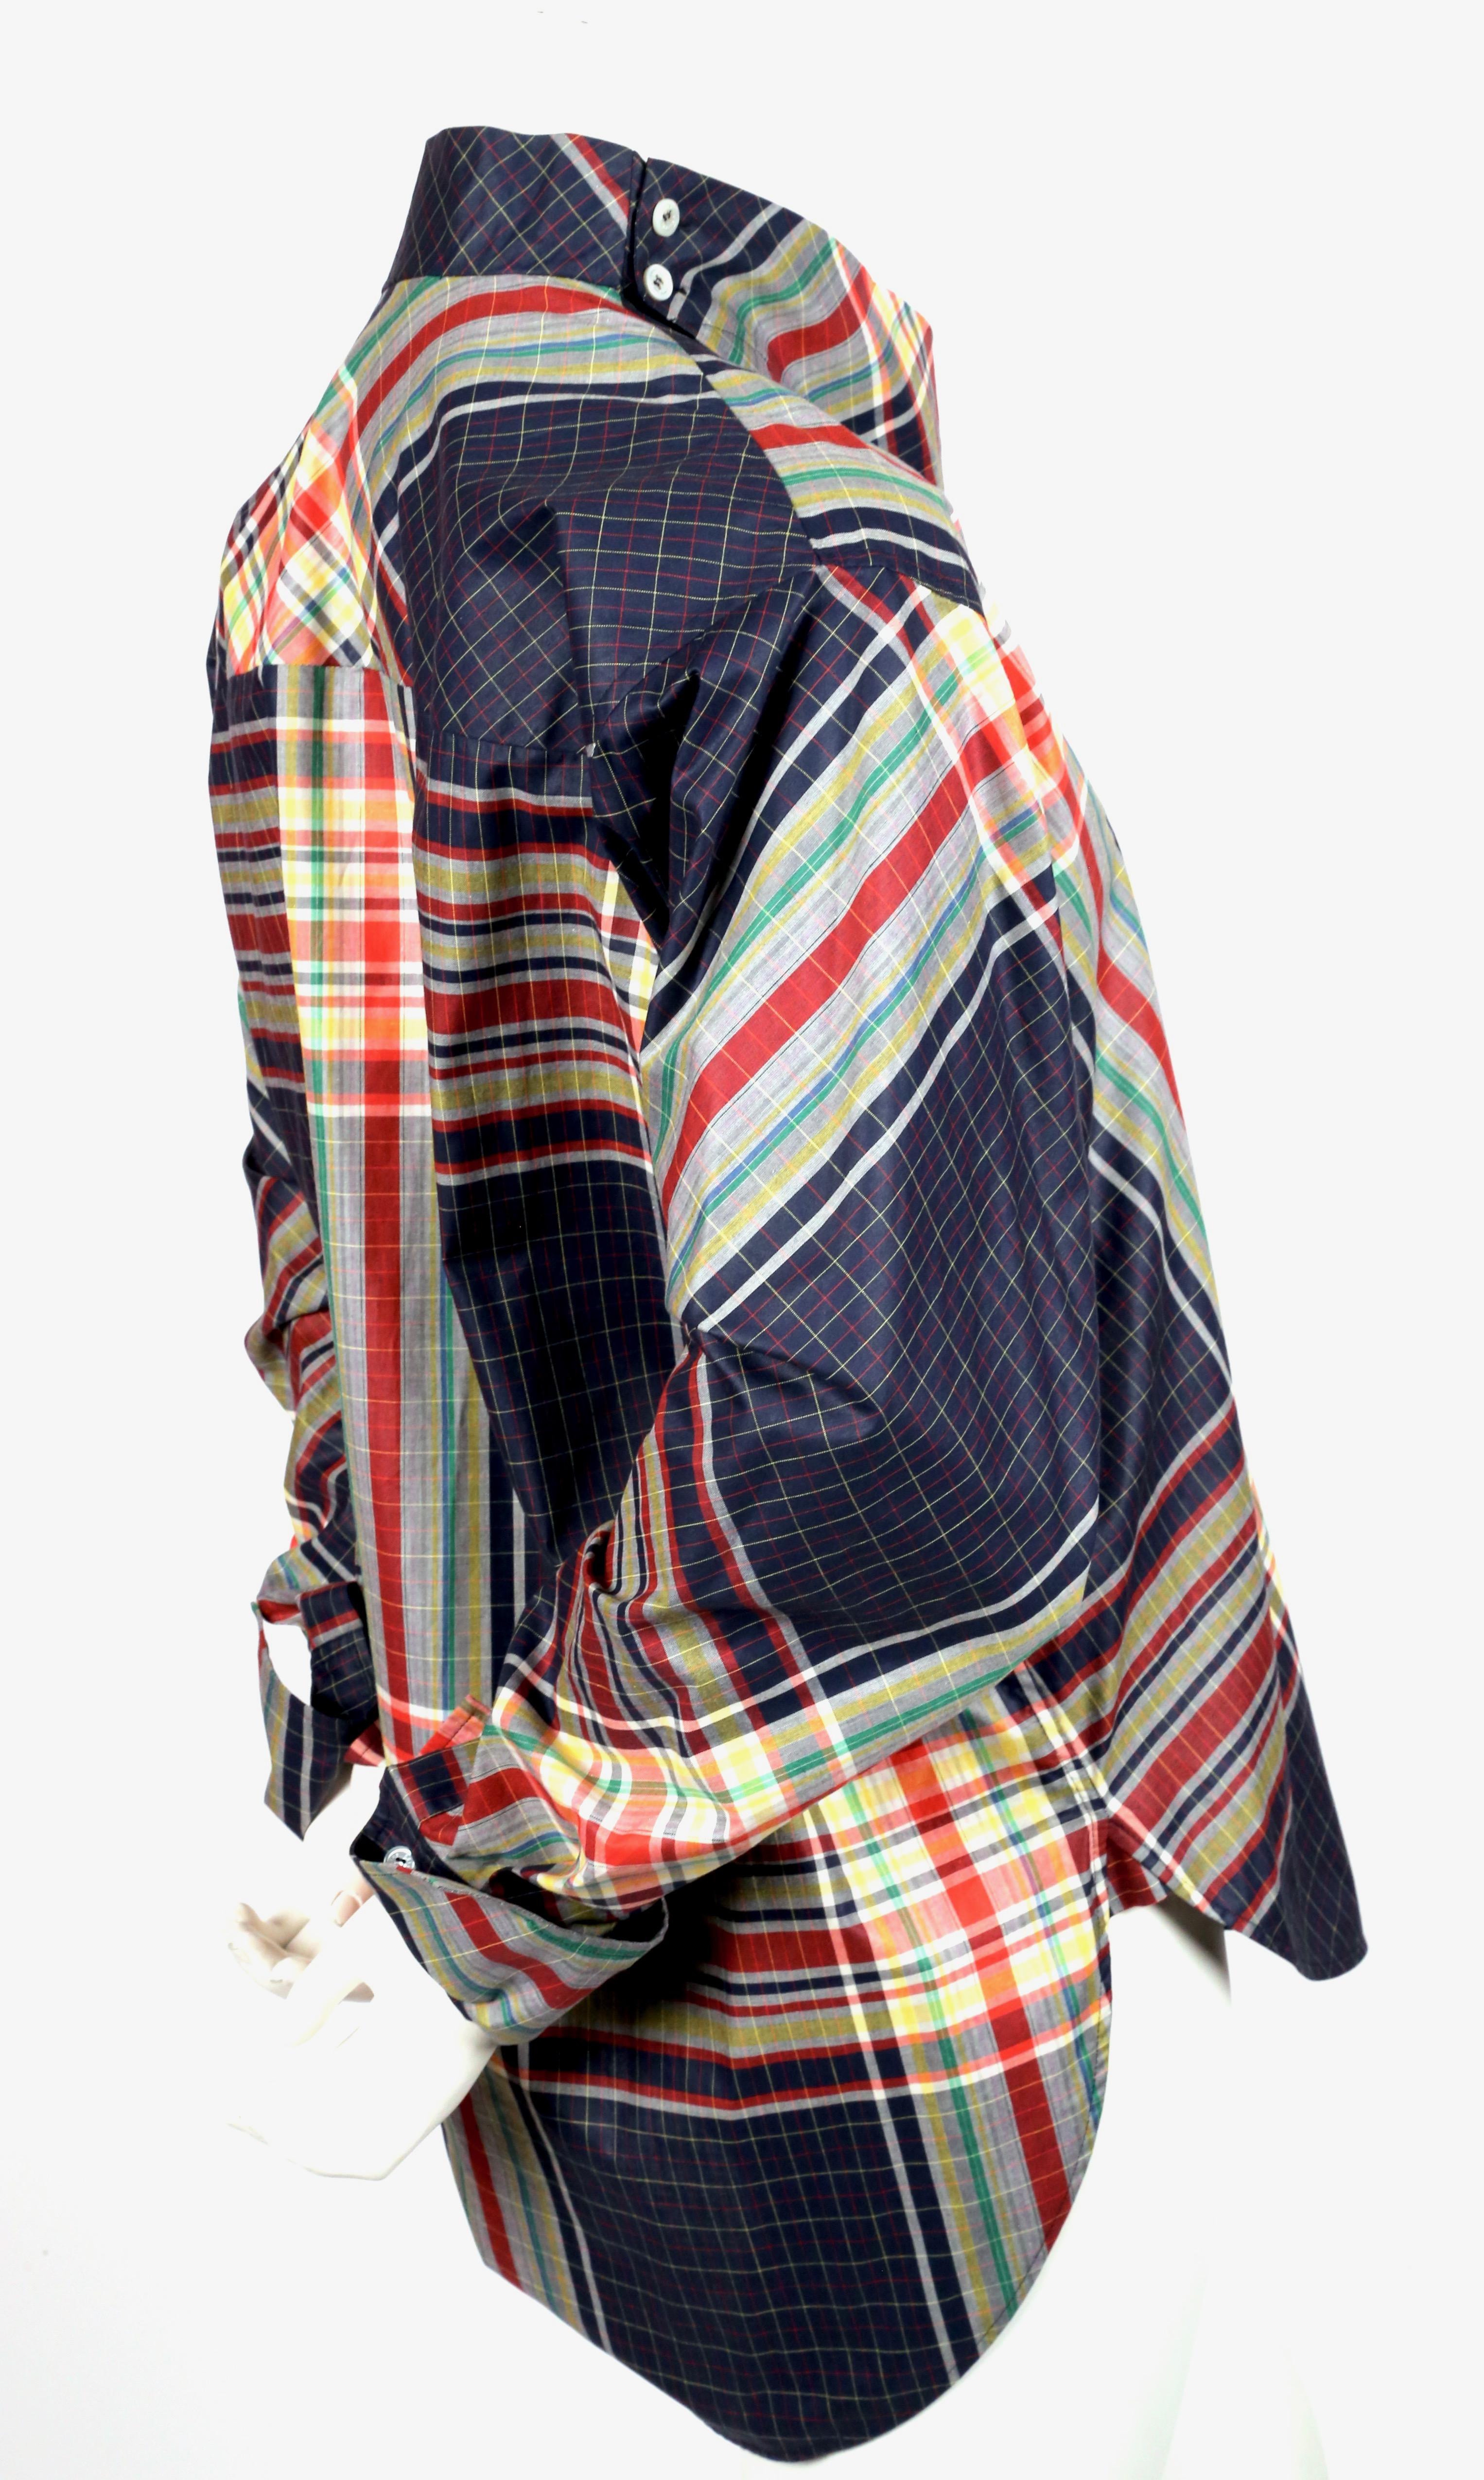 Plaid cotton runway top with draped neckline and French cuffs designed by Phoebe Philo for Celine as seen on the fall 2013 runway. French size 34 however this fits many sizes due to the oversized cut. Approximate measurements: dropped shoulder 18